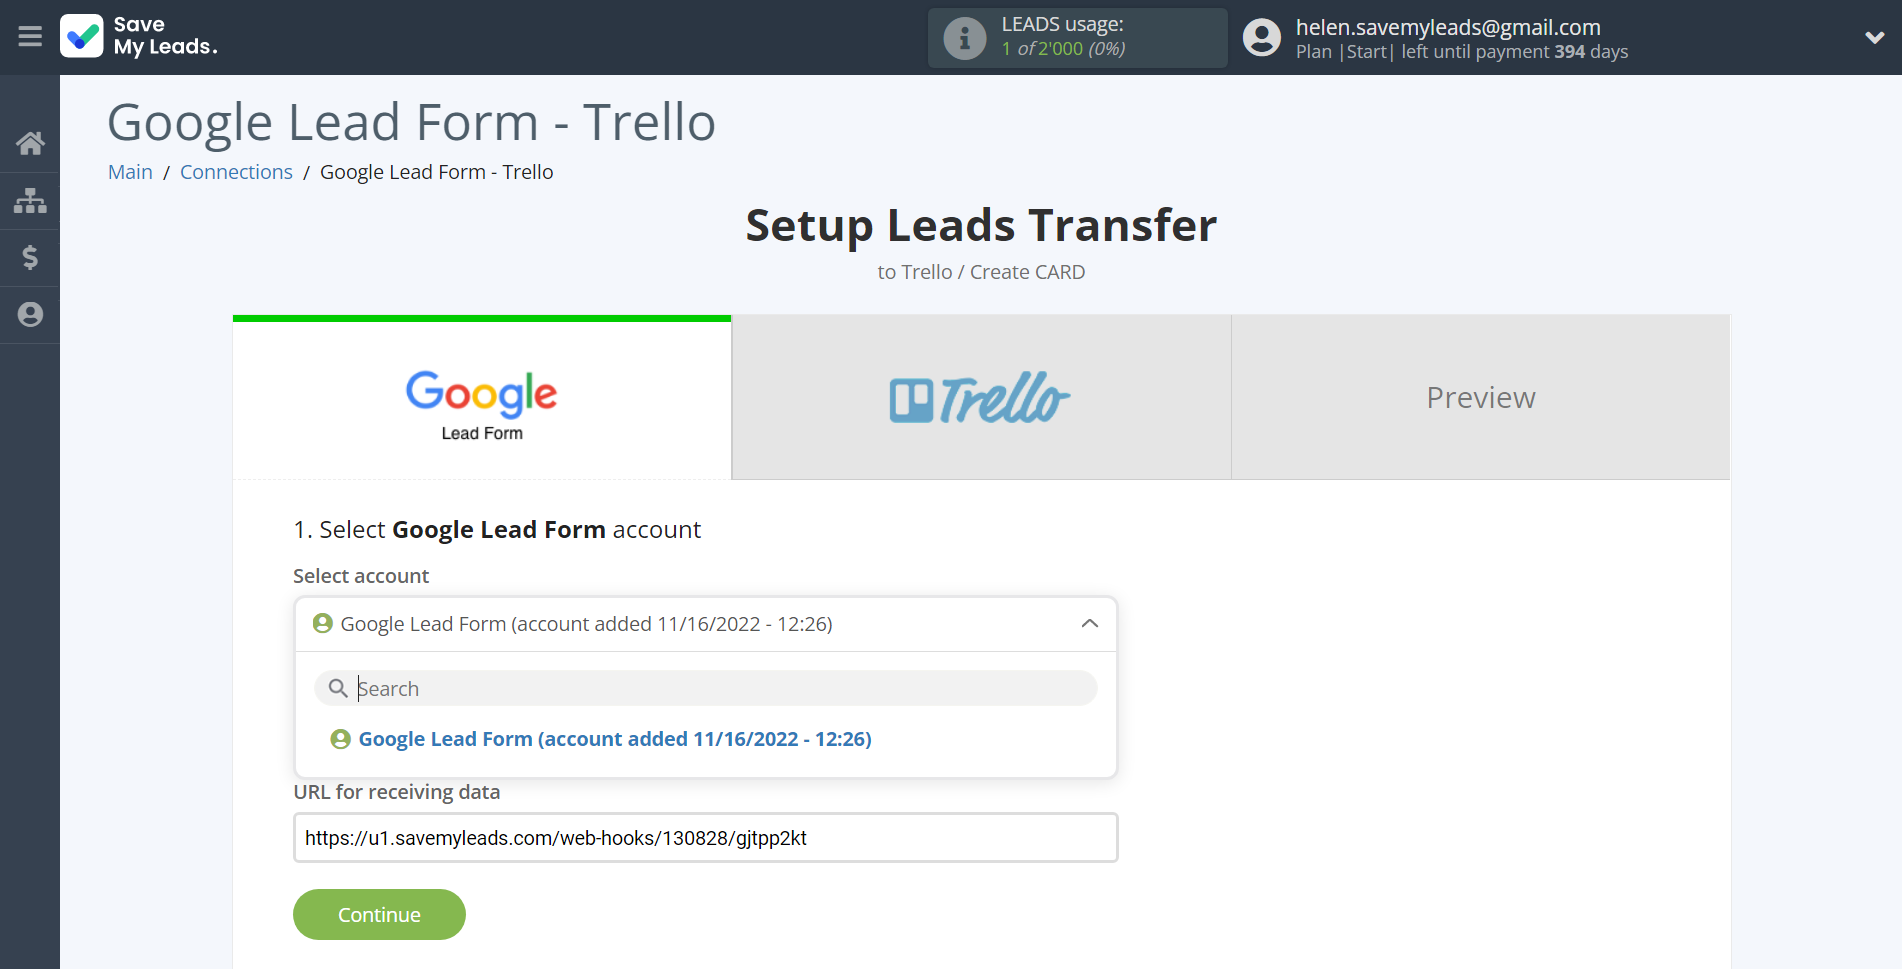 How to Connect Google Lead Form with Trello | Data Source account selection